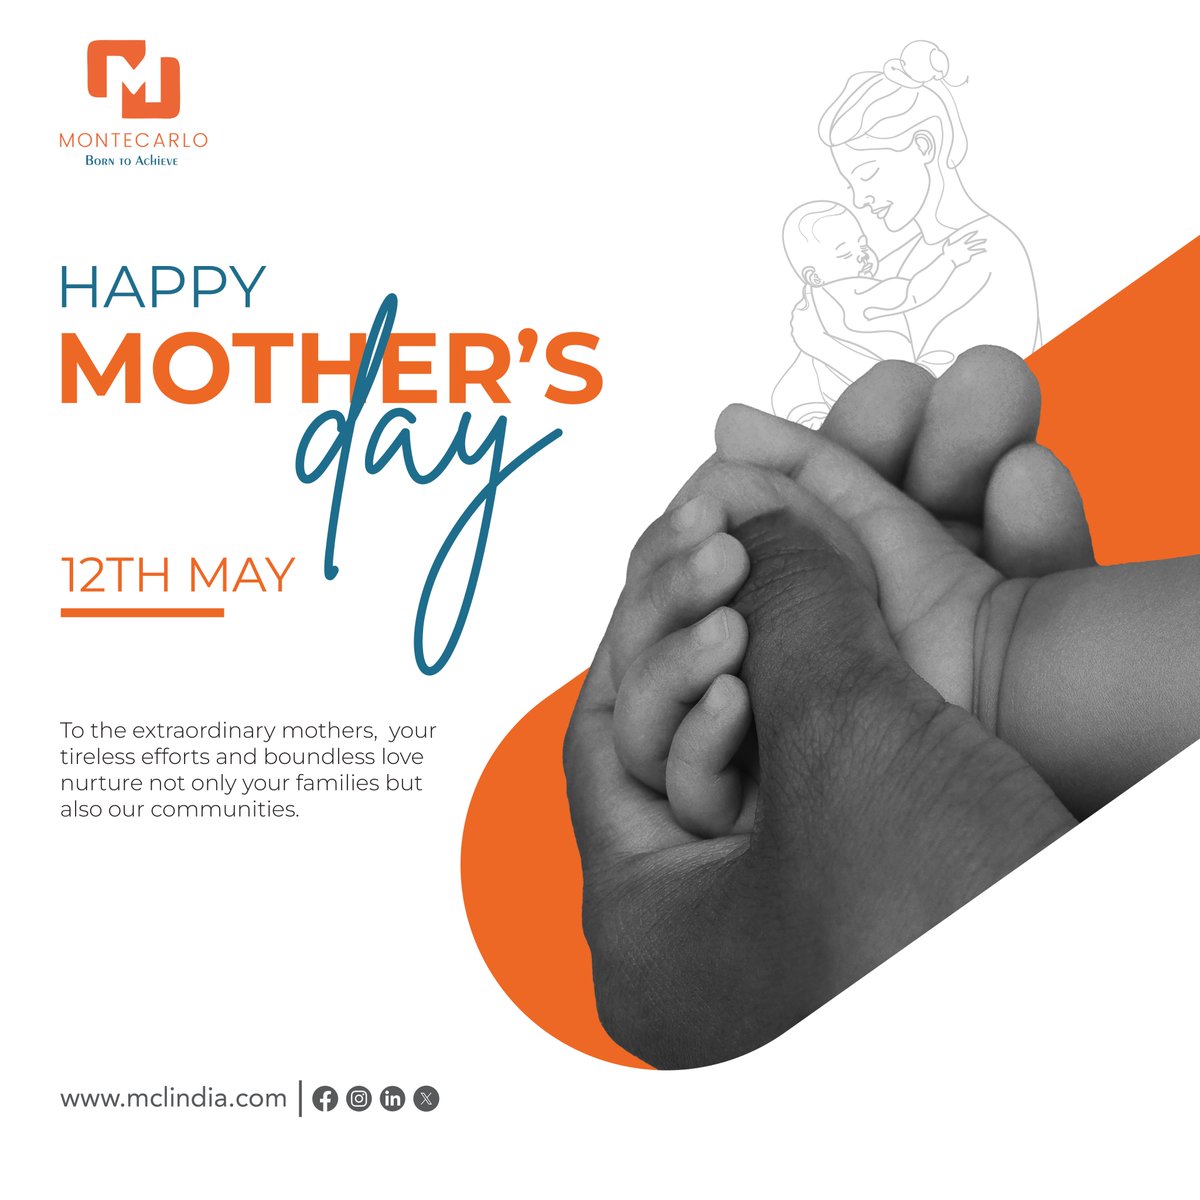 Happy Mother's Day to the women who pave the way for the next generation. Let's celebrate the amazing moms in our lives!

#transforminglives #nationbuilding #MakingADifference #InfrastructureDevelopment #mothersady #mom #momlove #buildingthenation